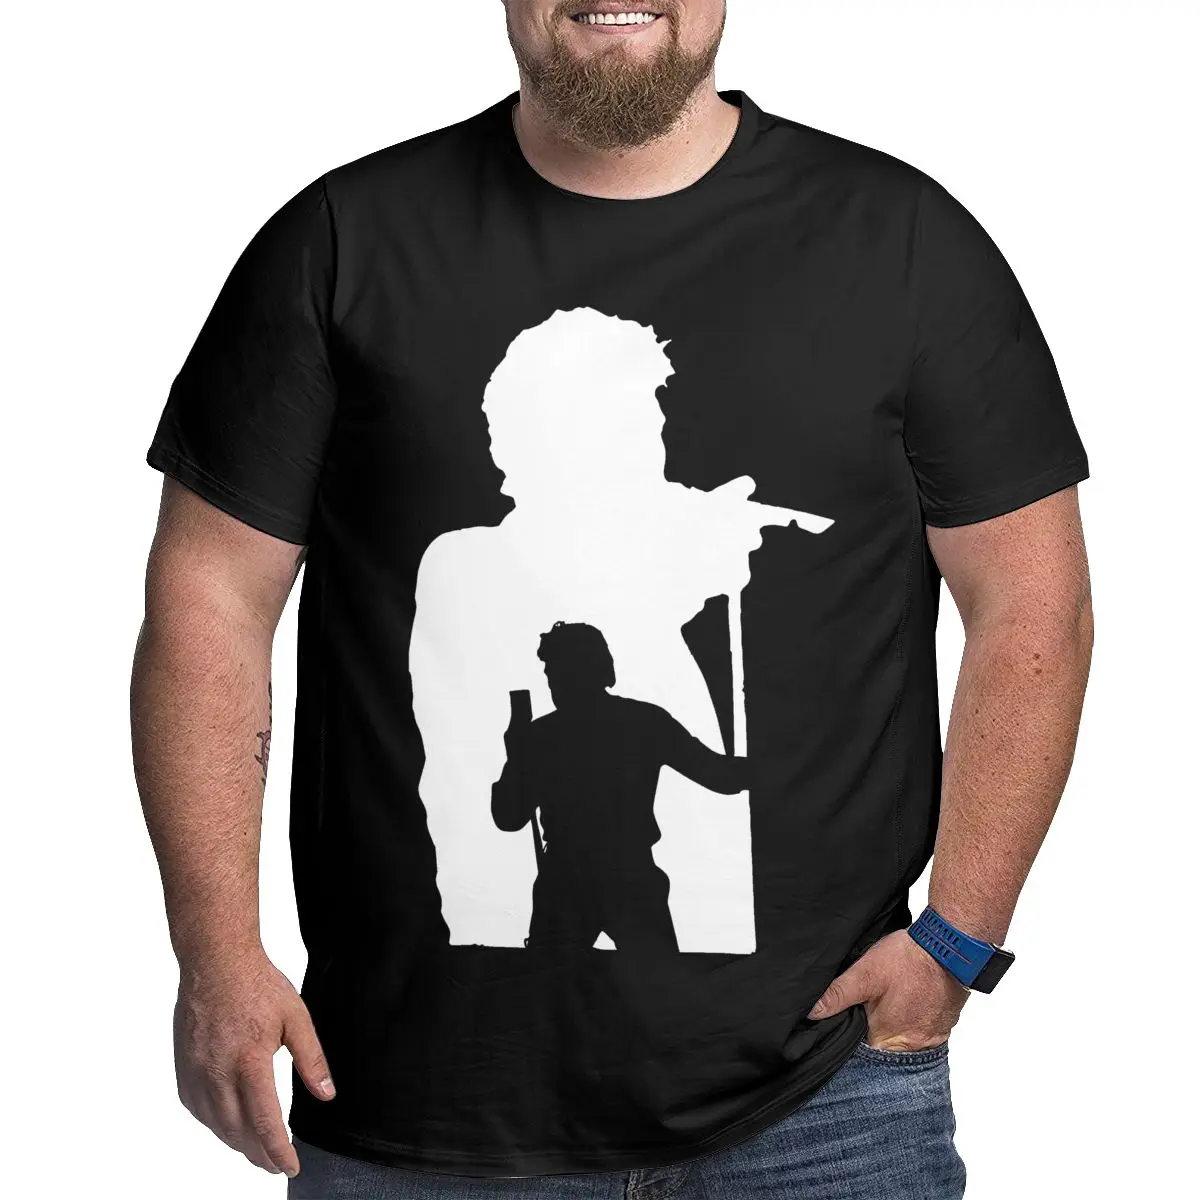 

Johnny And Hallyday Shadow Effects Big Size Graphic Cool Plus Size T-shirt Sarcastic Big Tall Man Oversized Tops Tees